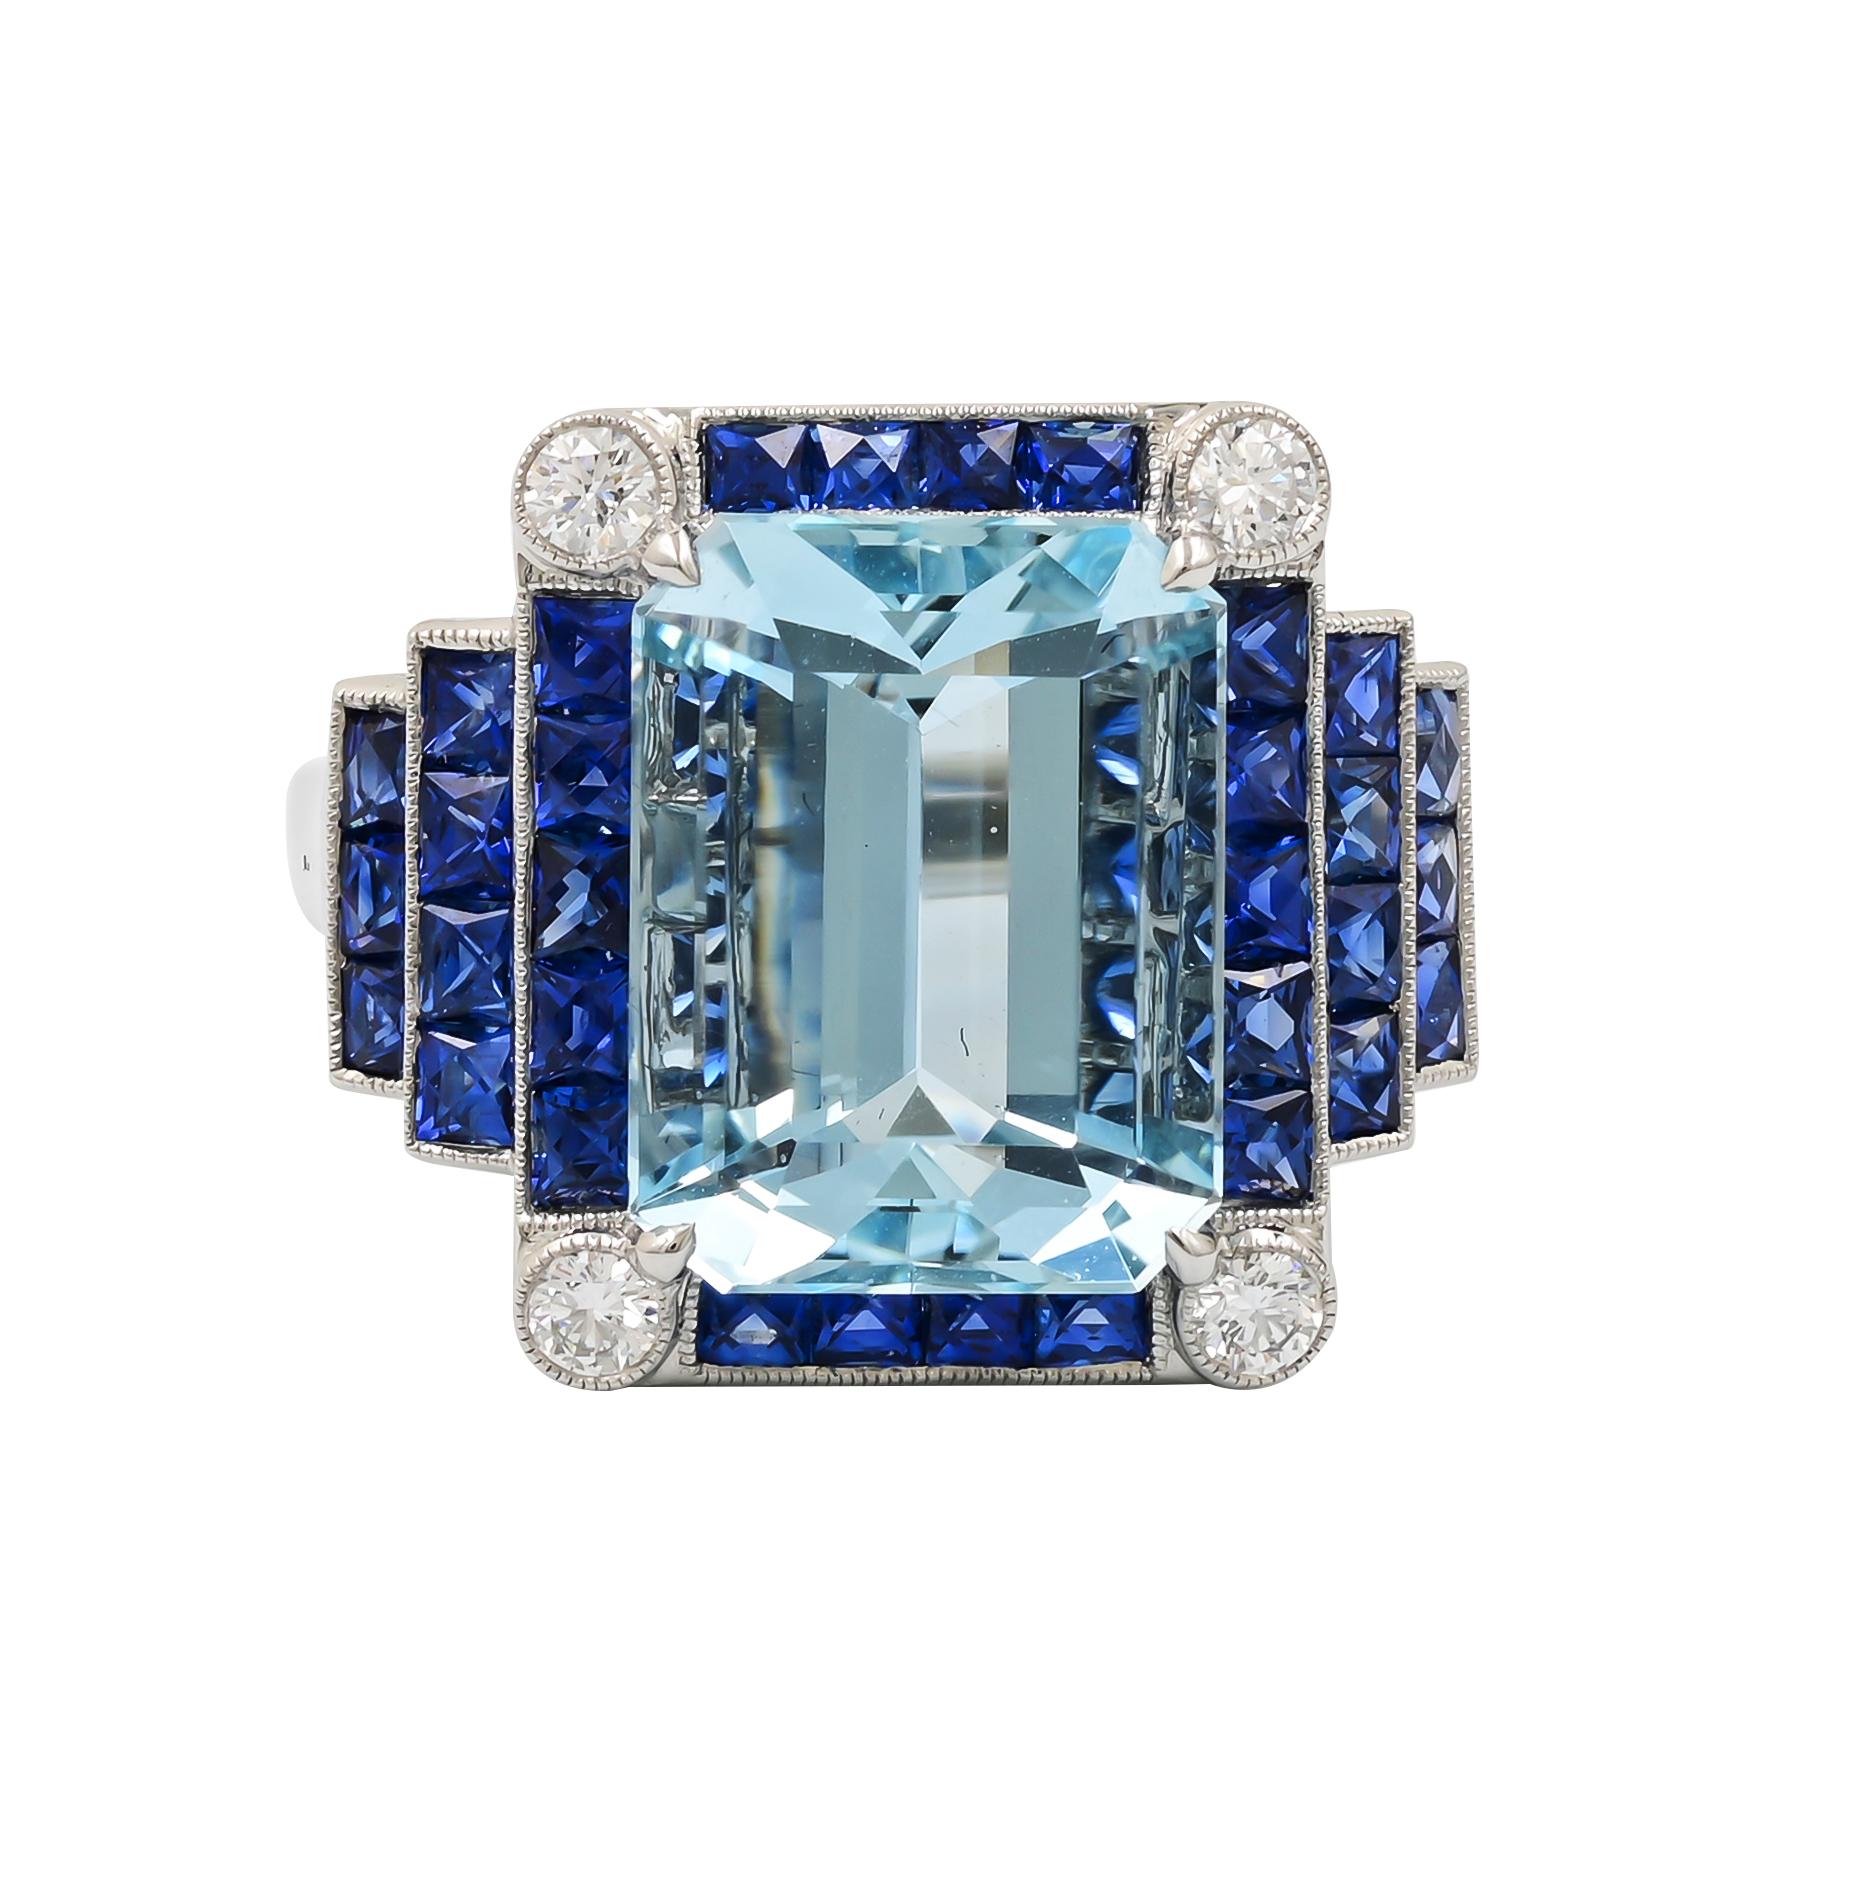 Sophia D Art Deco platinum ring with 5.46 carats aquamarine center stone accented with 1.40 carat blue sapphires and 0.29 carats diamonds. The ring is a size 6 and resizing is available. 

Sophia D by Joseph Dardashti LTD has been known worldwide